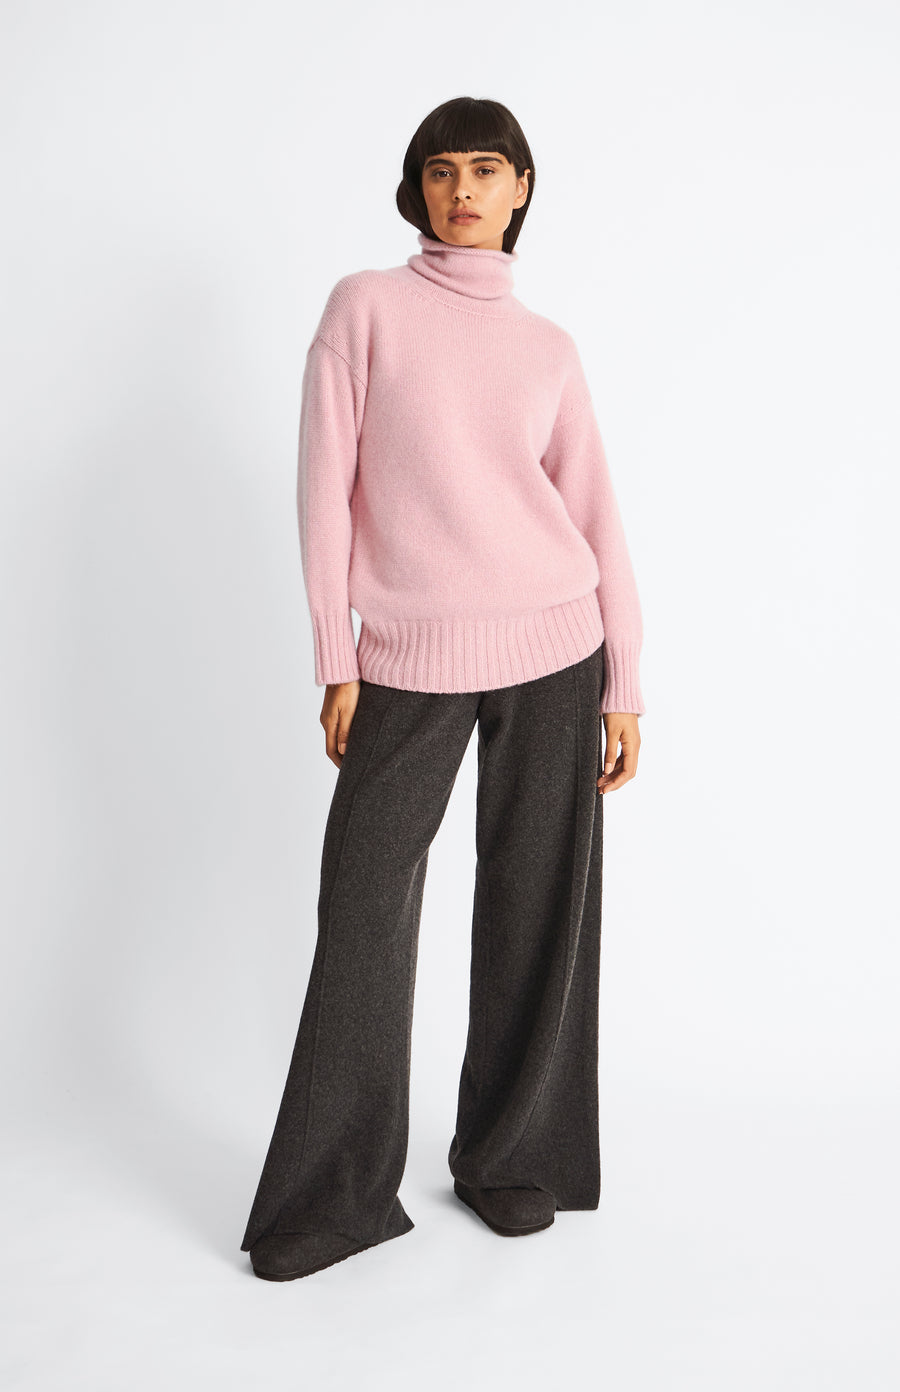 Pringle of Scotland High Neck Cosy Cashmere Jumper In Dusty Pink on model full length